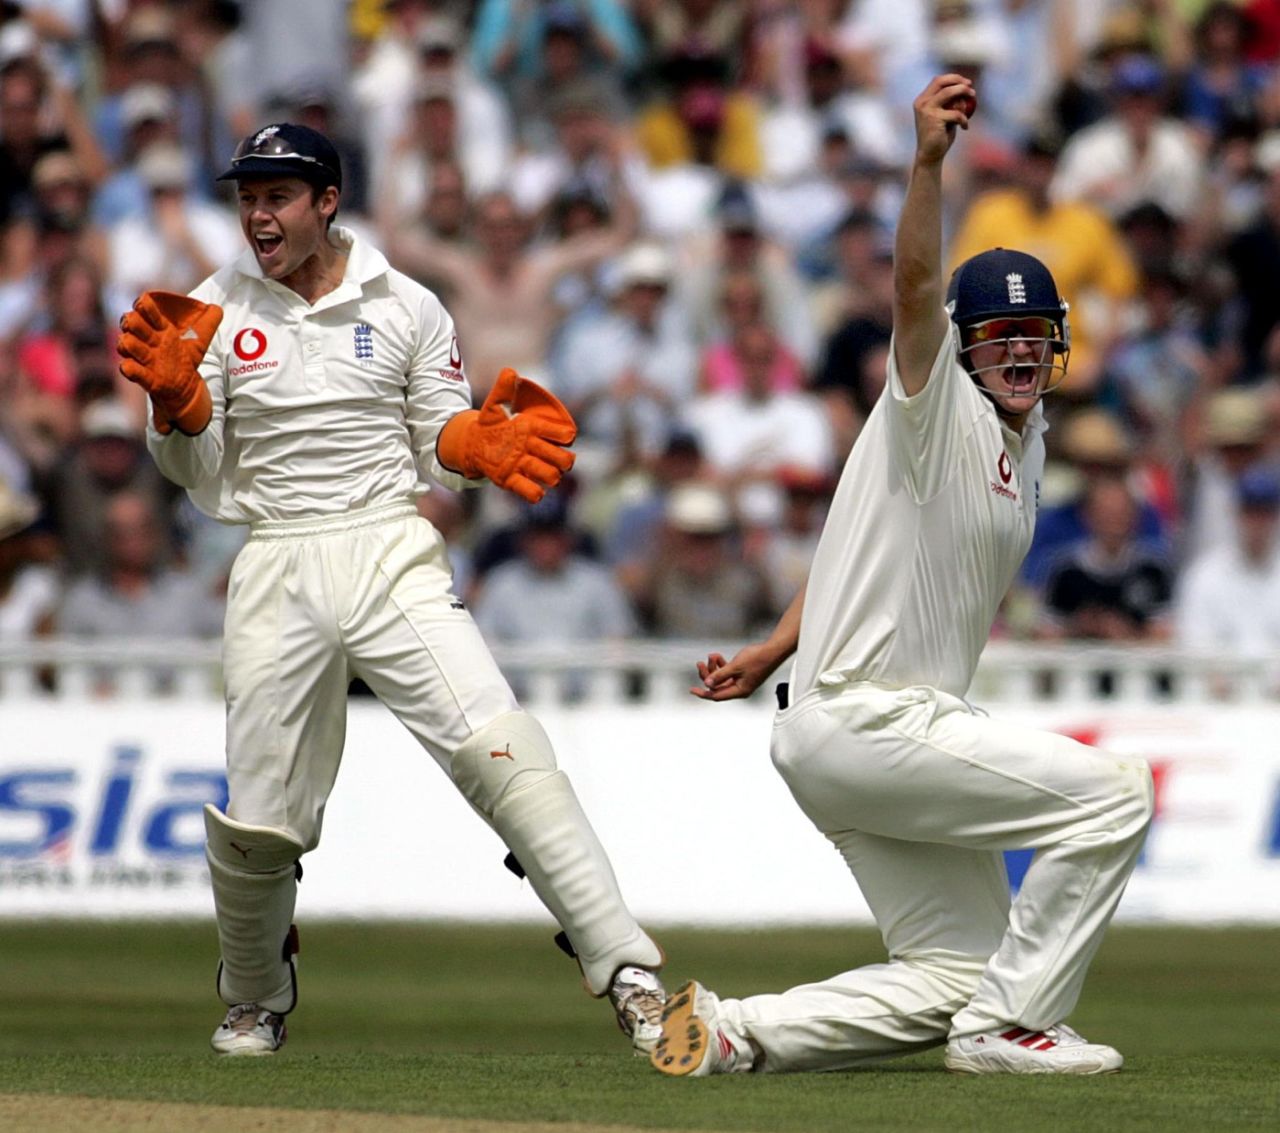 Rob Key takes a catch during the Edgbaston Test in 2004 as his Kent team-mate Geraint Jones celebrates, England vs West Indies, July 31, 2004